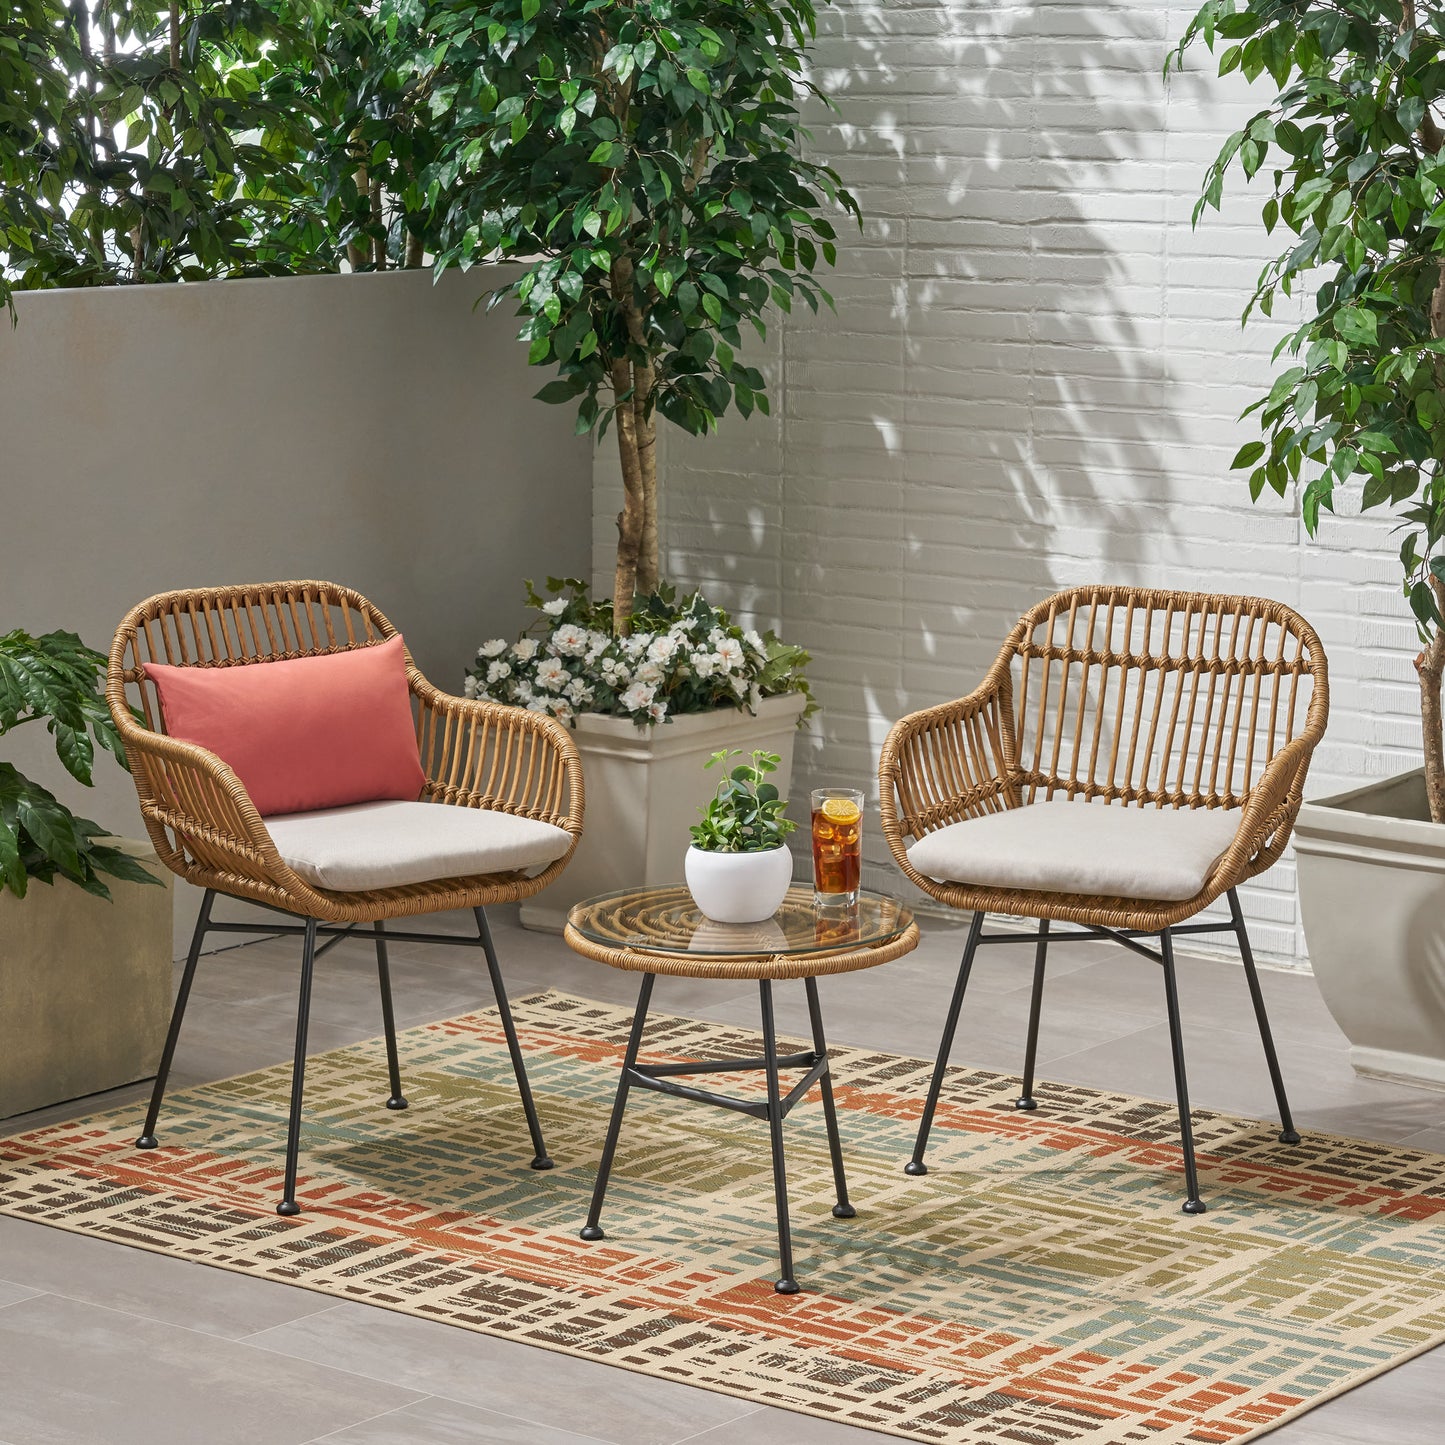 Lesley Outdoor Faux Wicker 2 Seater Chat Set with Tempered Glass Table